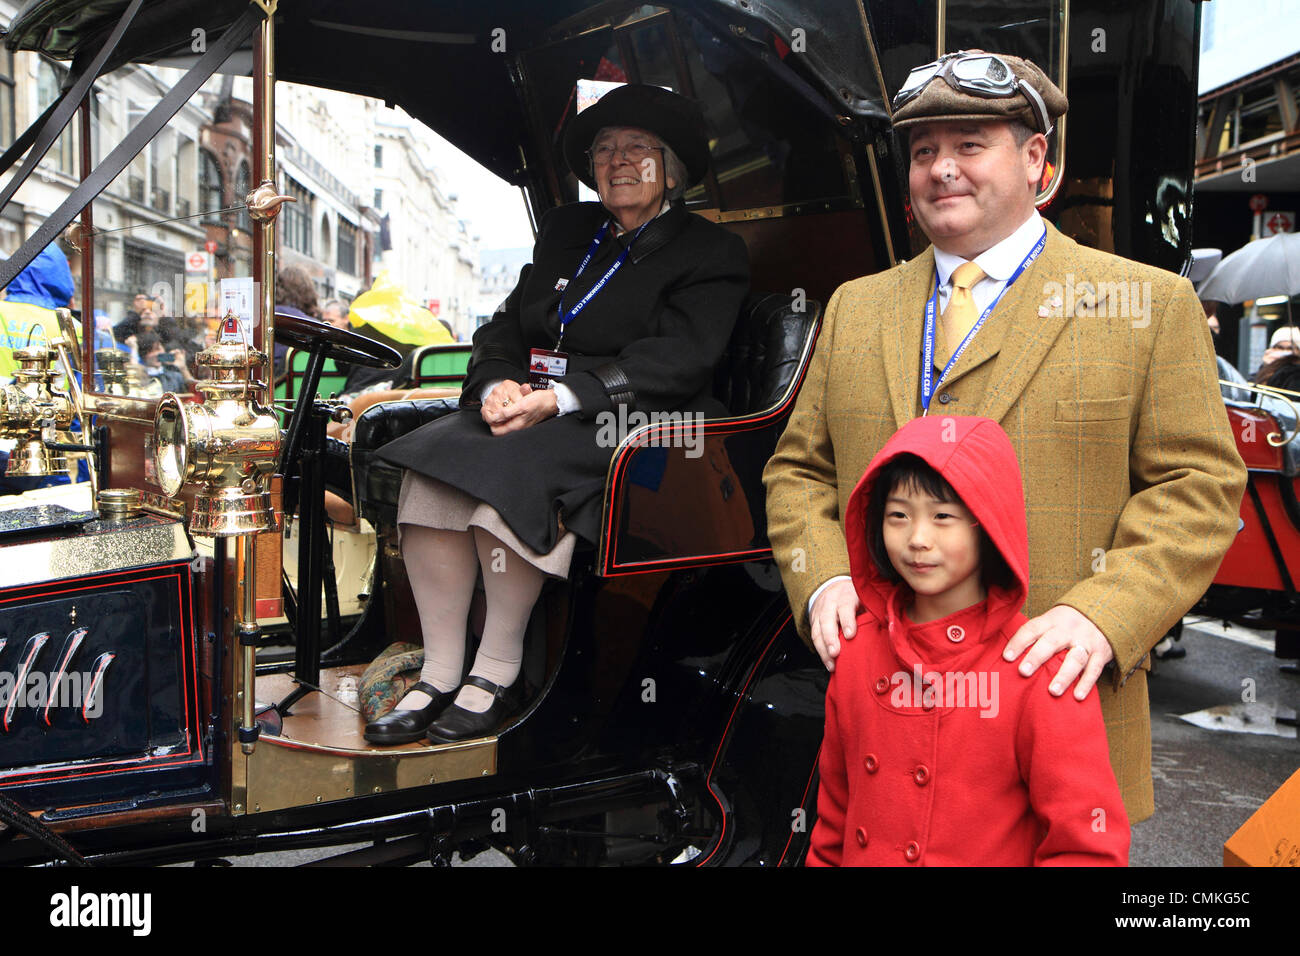 Participants in the Royal Automobile Club's annual London to Brighton Veteran Car Rally pose for photographs, London UK Stock Photo